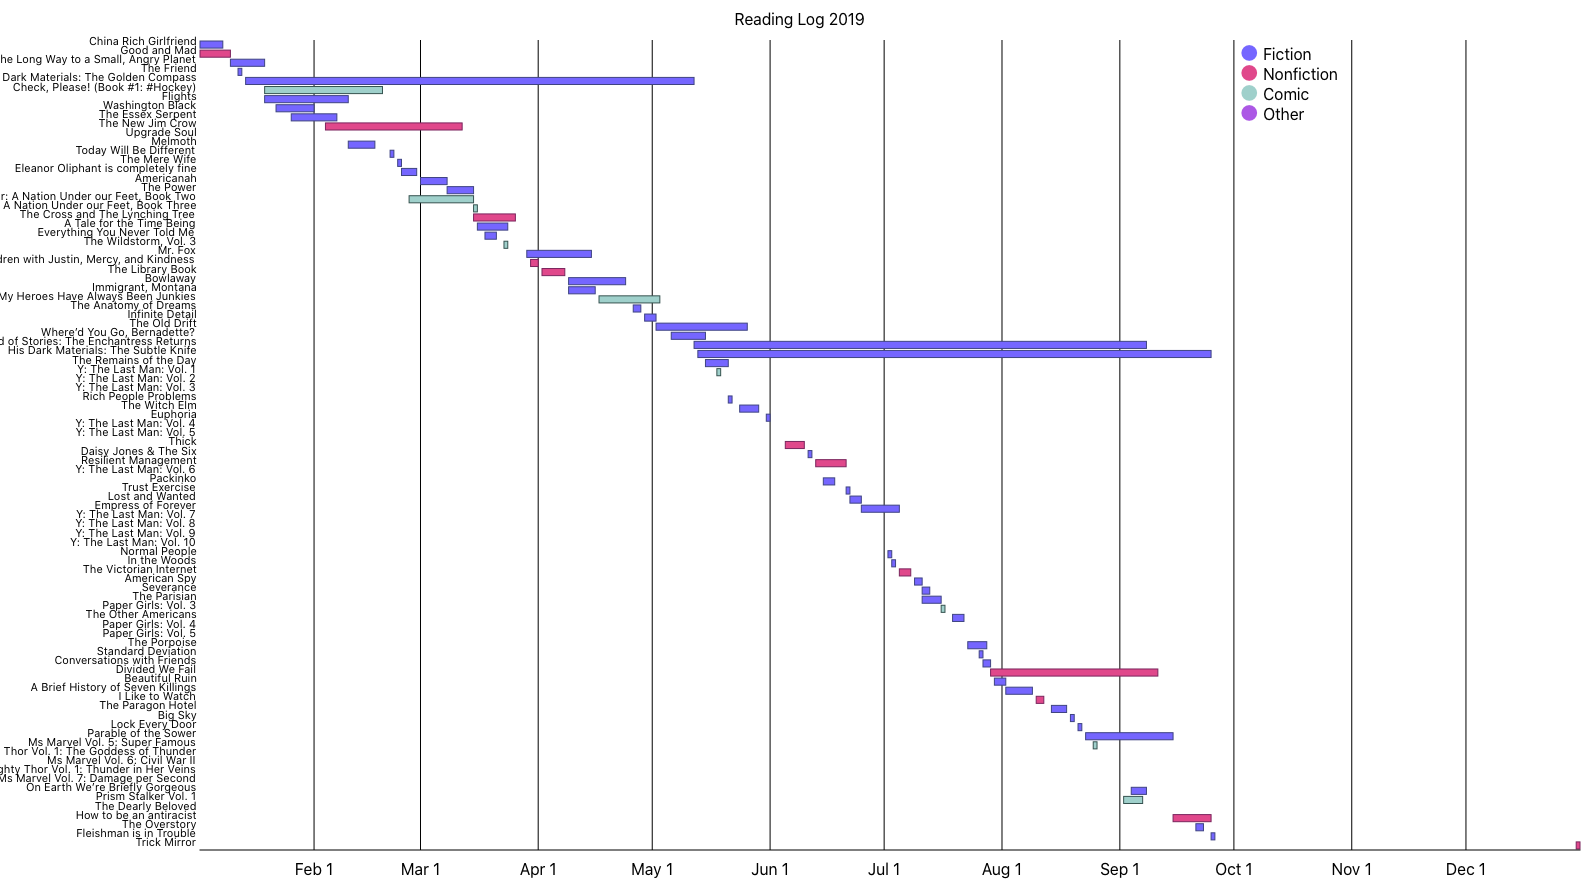 Timeline-style reading log, with blank spots for single-day books